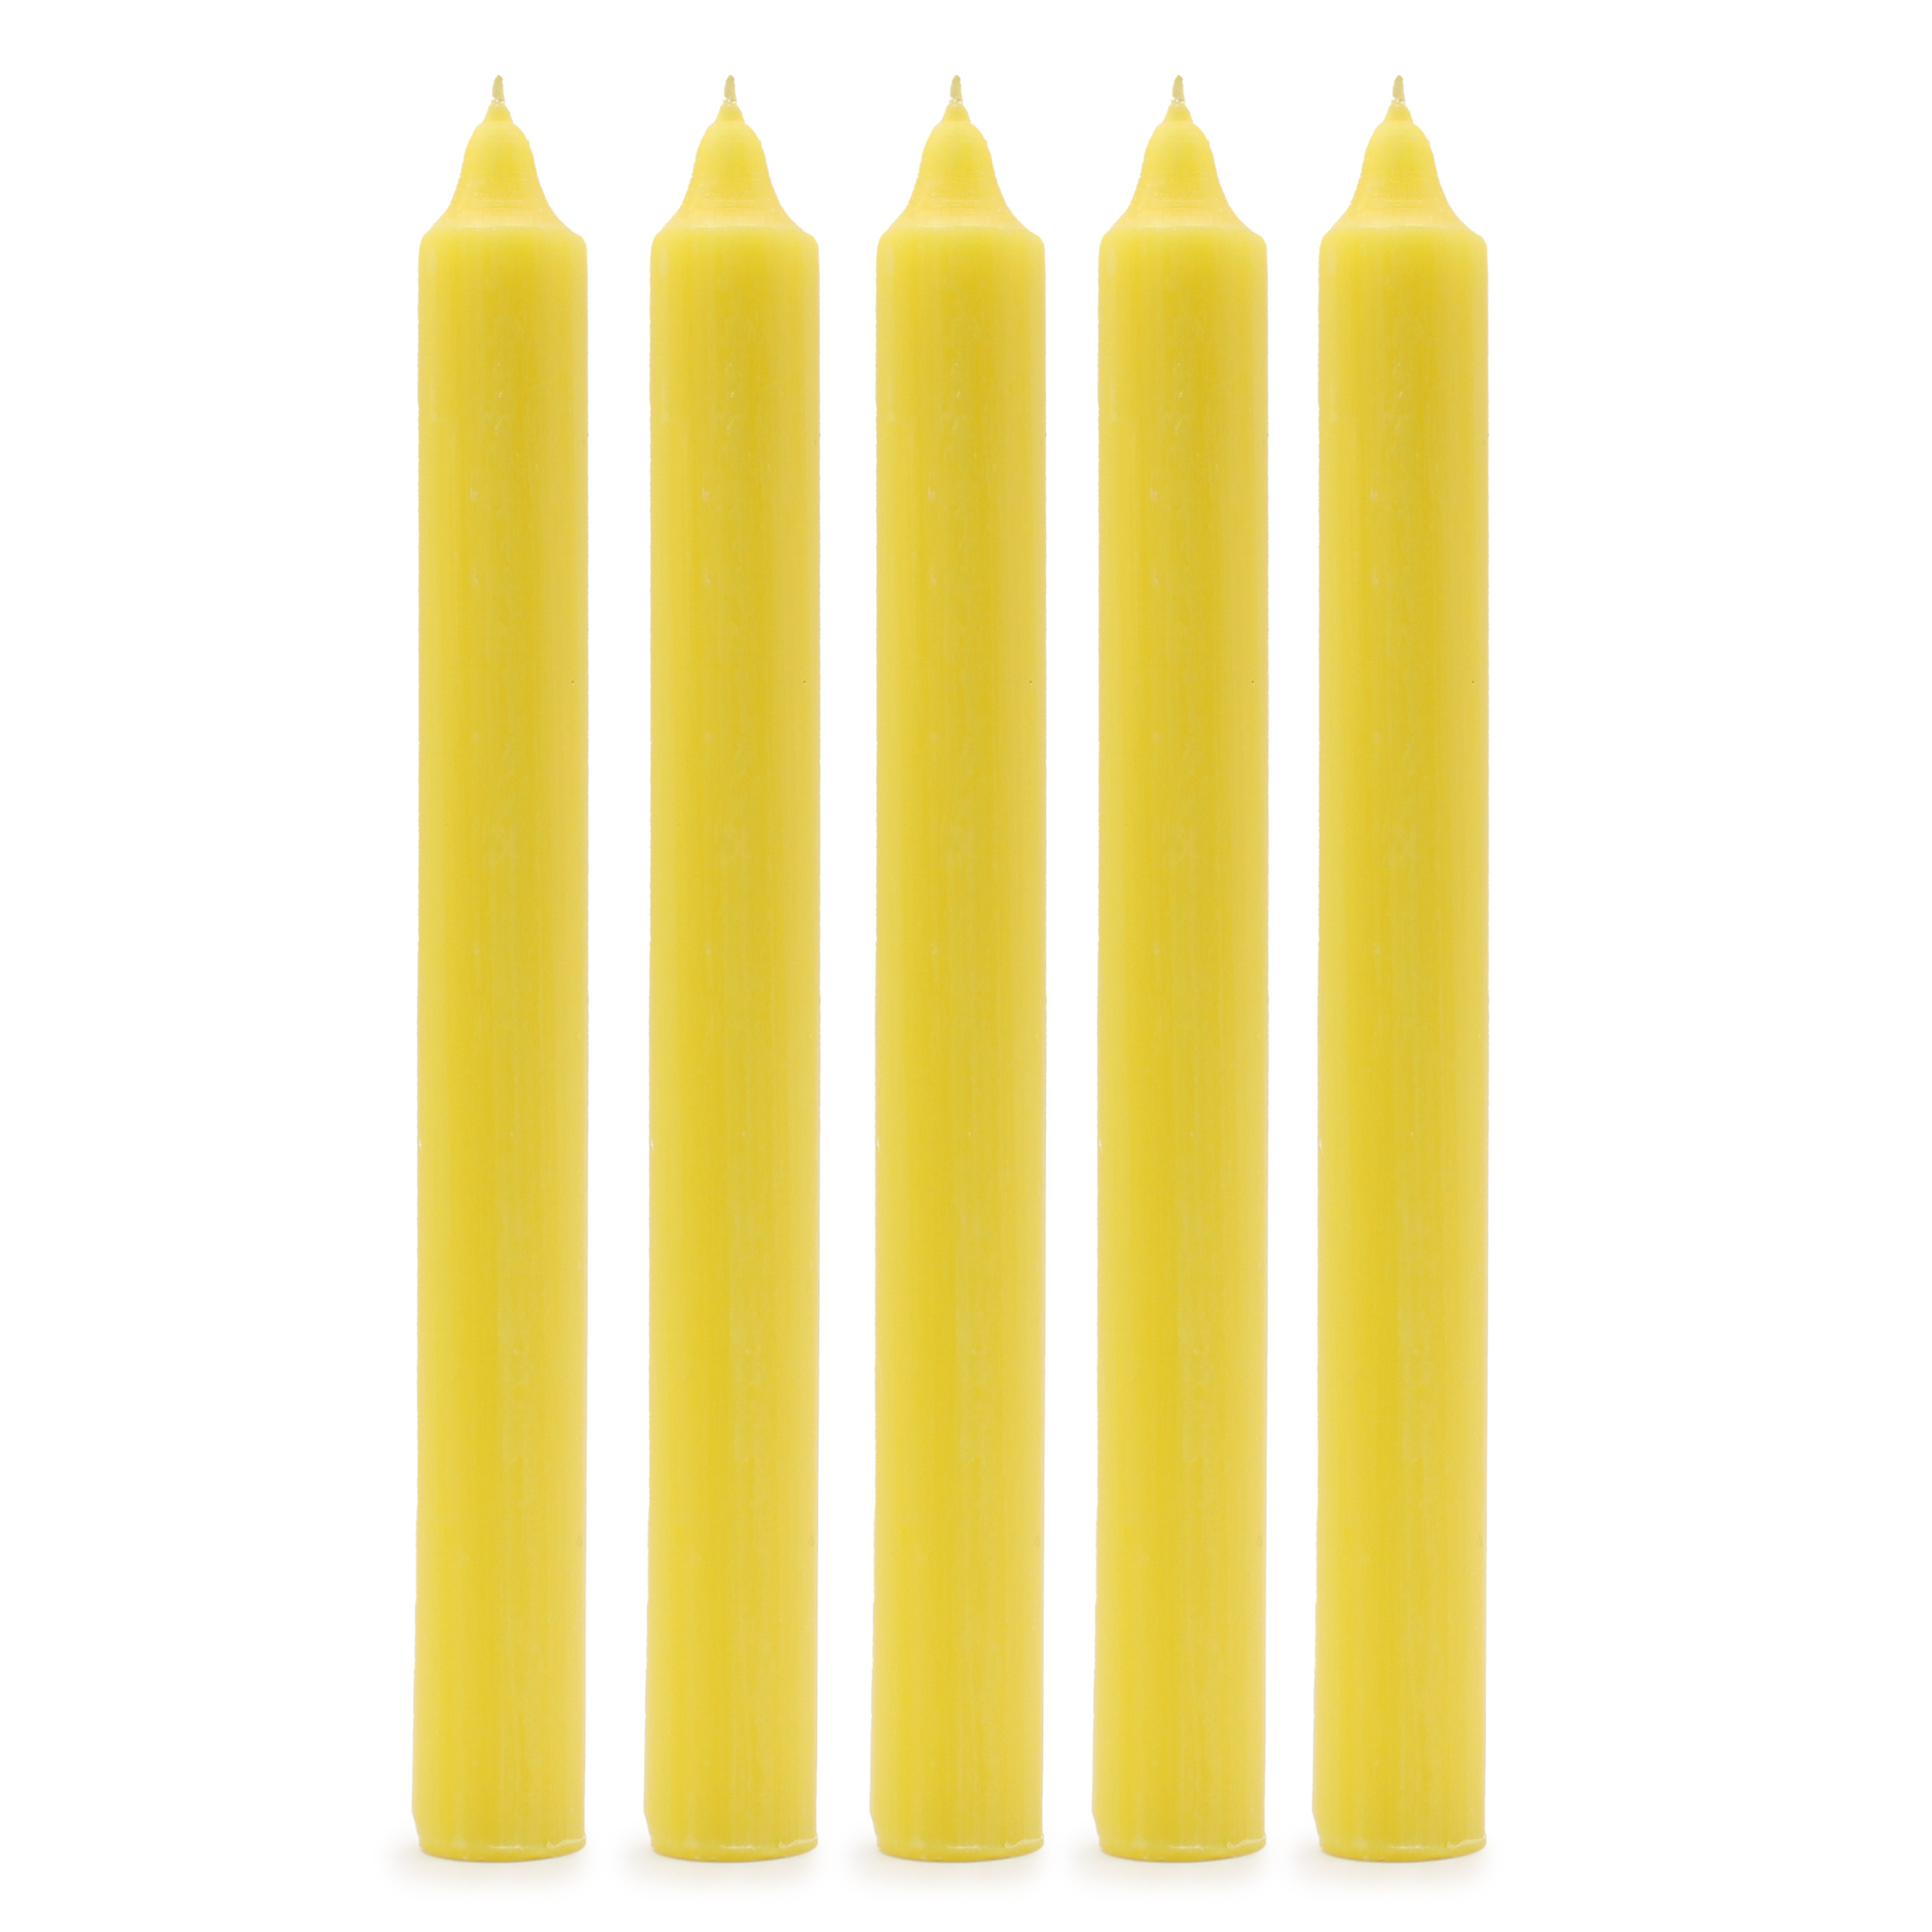 Solid Colour Dinner Candles - Rustic Lemon - Pack of 5